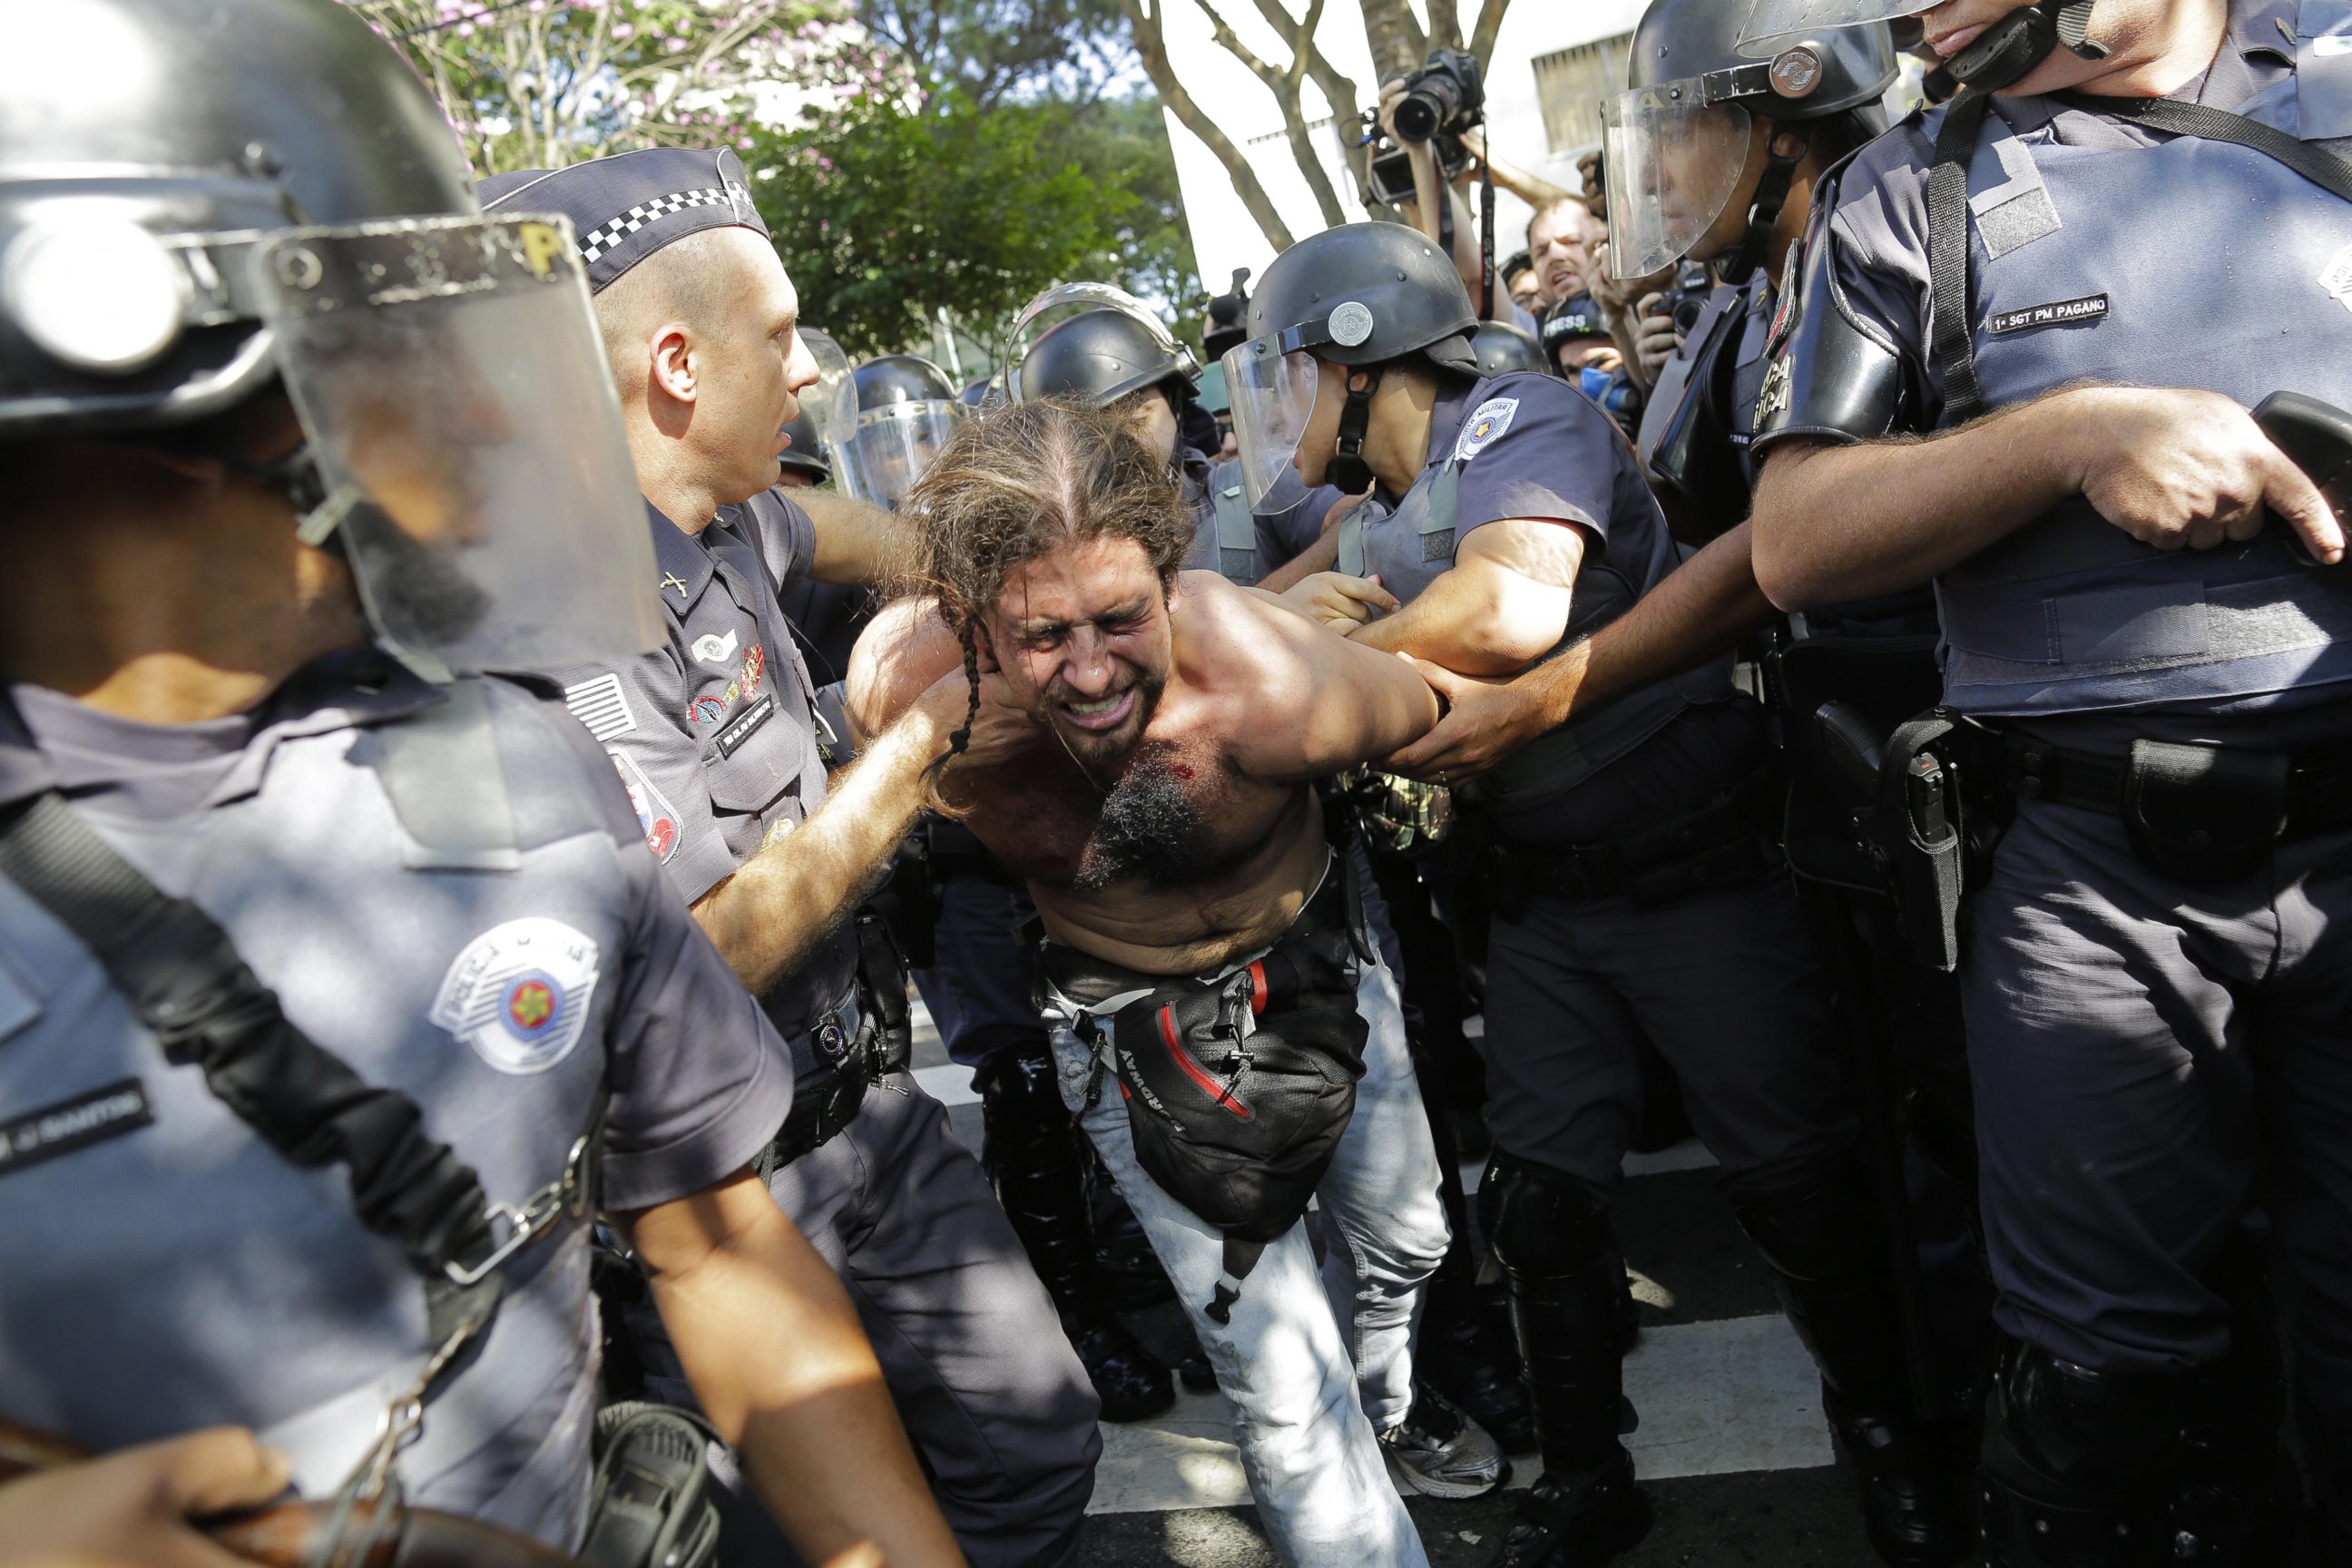 PHOTO: A protester is detained by police during a demonstration by people demanding better public services and against the money spent on the World Cup soccer tournament in Sao Paulo, Brazil, June 12, 2014. 